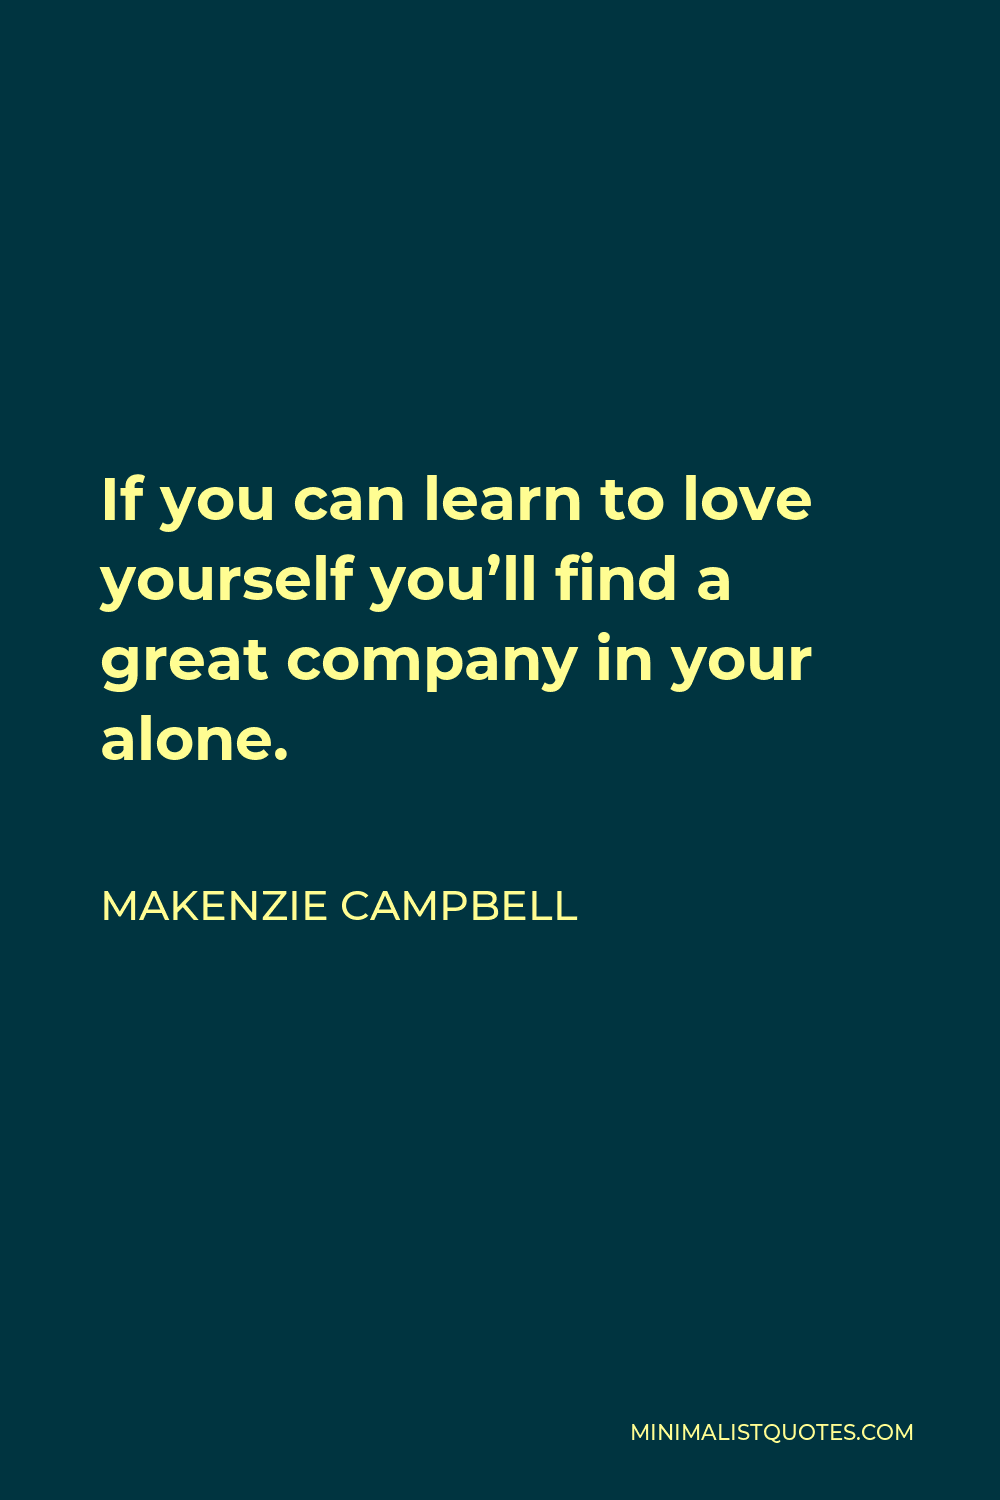 Makenzie Campbell Quote - If you can learn to love yourself you’ll find a great company in your alone.